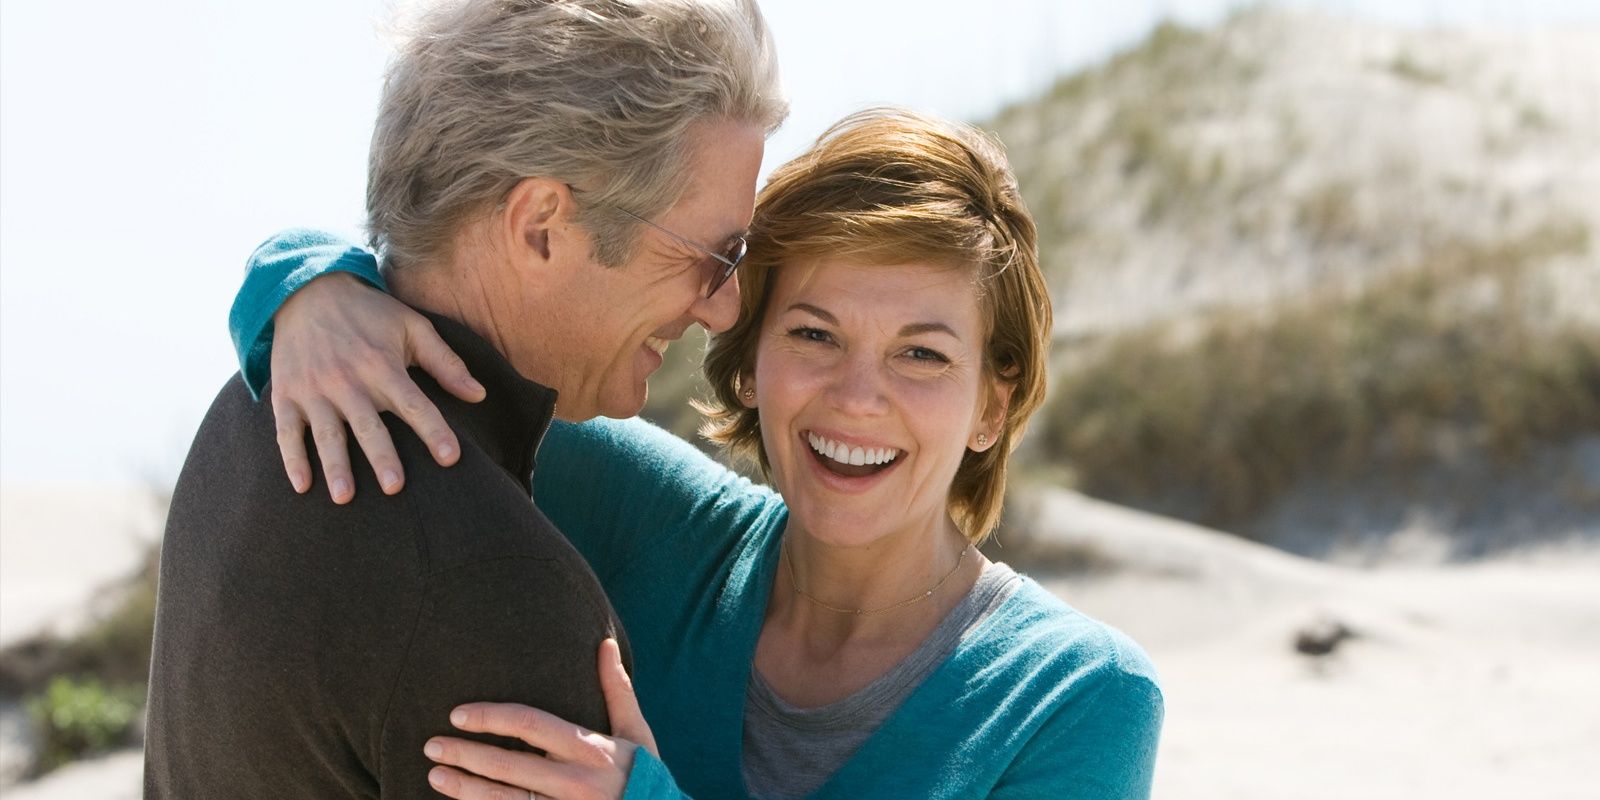 Adrienne and Paul laughing on the beach in Nights in Rodanthe